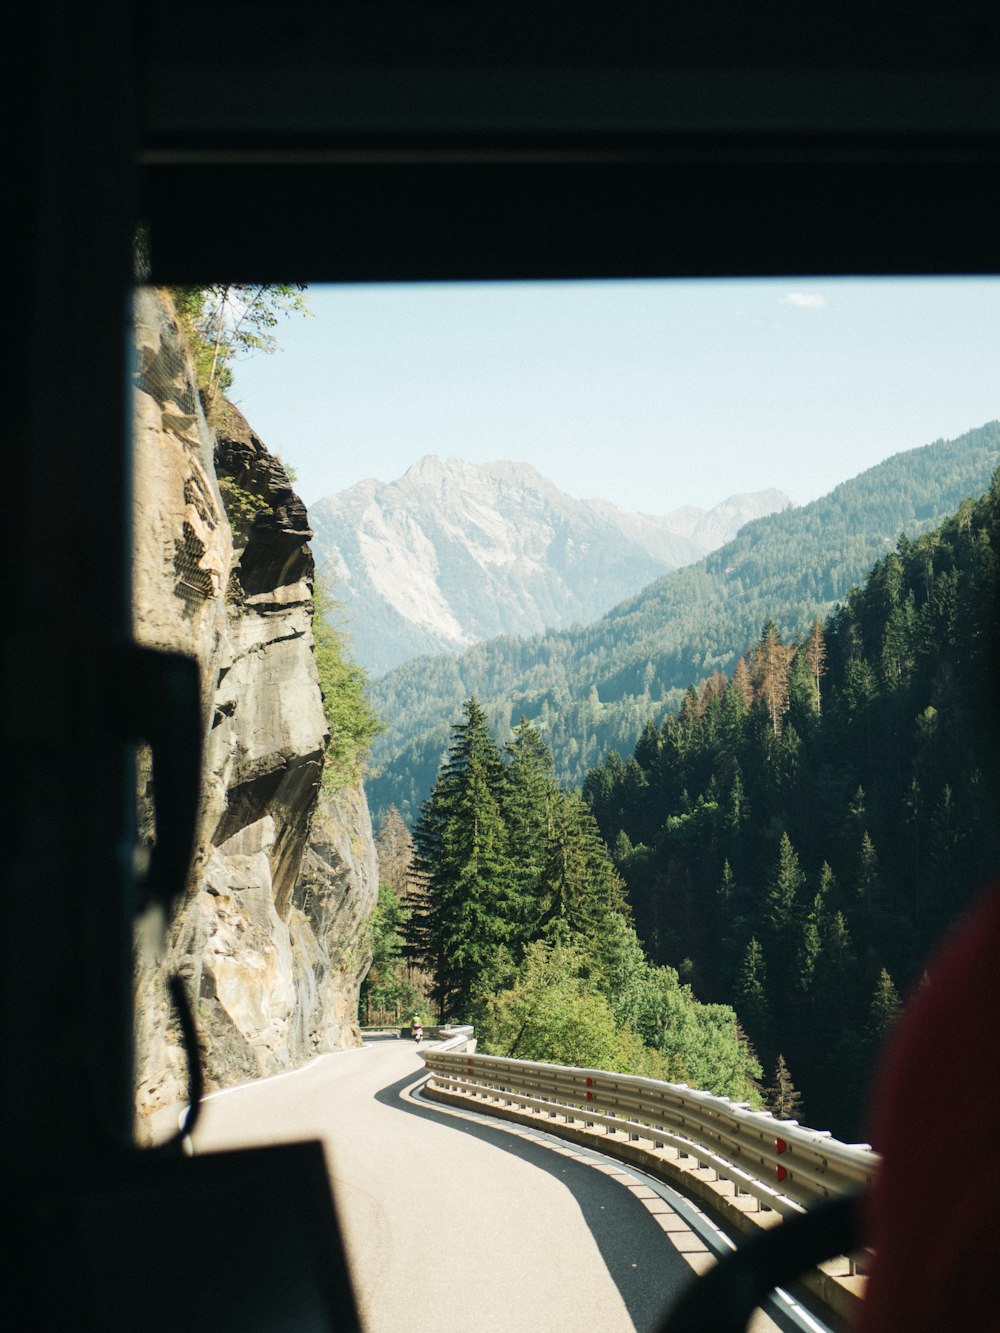 a view from inside a vehicle of a mountain road